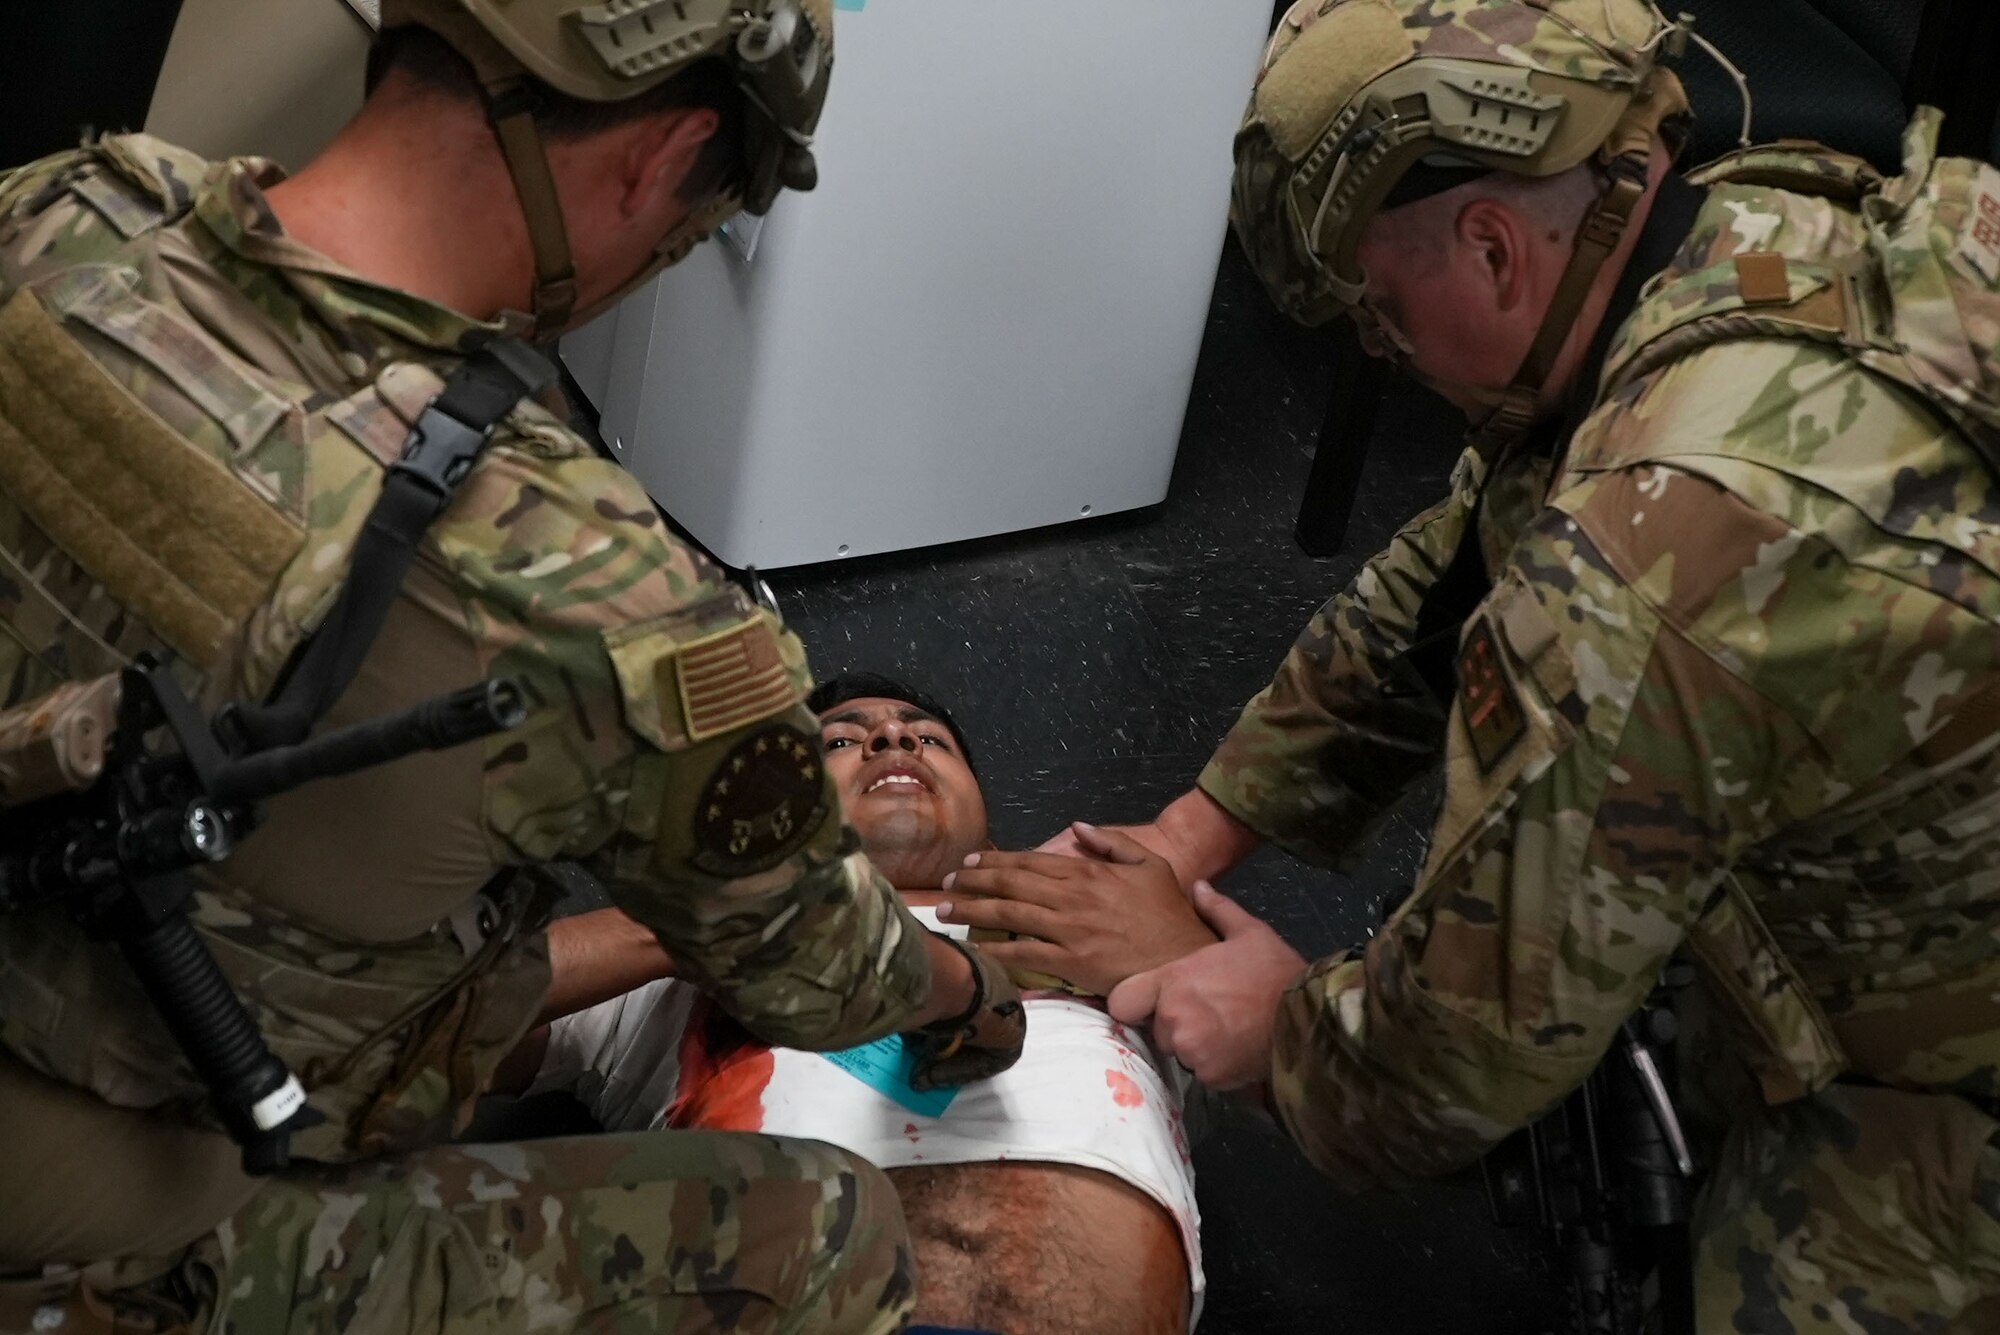 Staff Sgt. Matthew Moses, 7th Security Forces Squadron Base Defense Operations Center controller, and Tech. Sgt. Shane Felker, 7th SFS Systems and Technology NCO in charge, practice giving first aid to Senior Airman Giovanny Rodriguez, 7th Munitions Squadron munitions stockpile manager and exercise role player, during an active shooter exercise at Dyess Air Force Base, Texas, May 24, 2022.